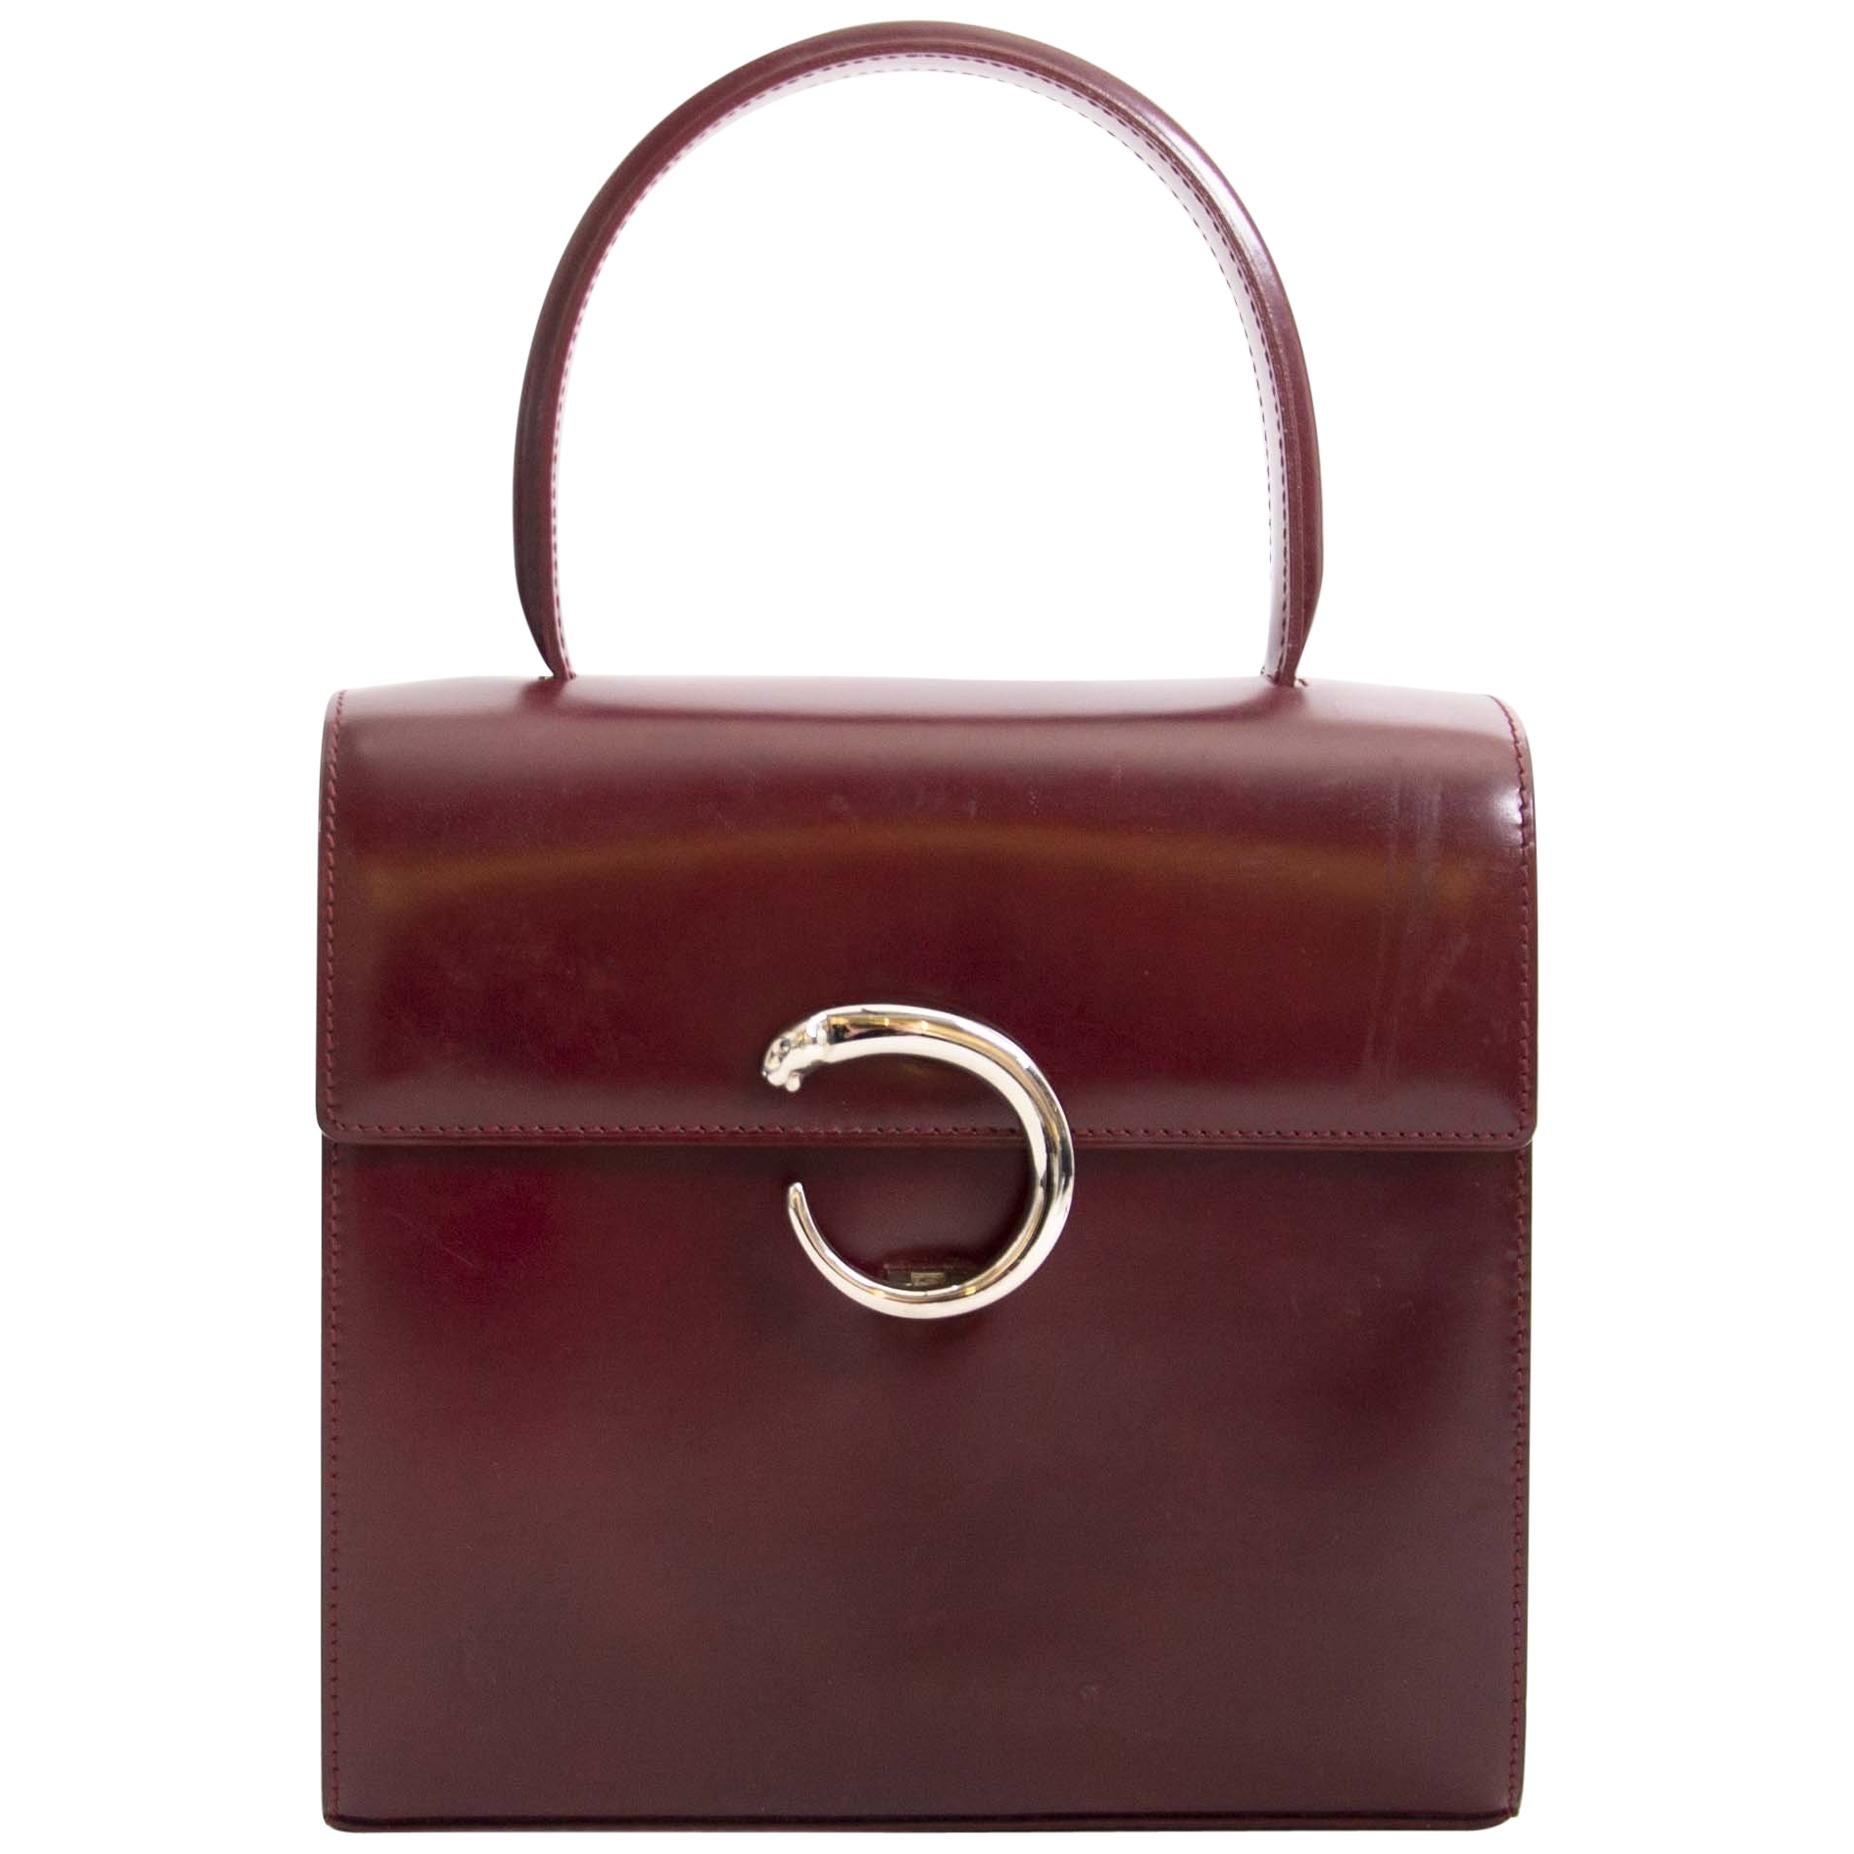 Cartier Panthere Red Leather Top Handle Bag 